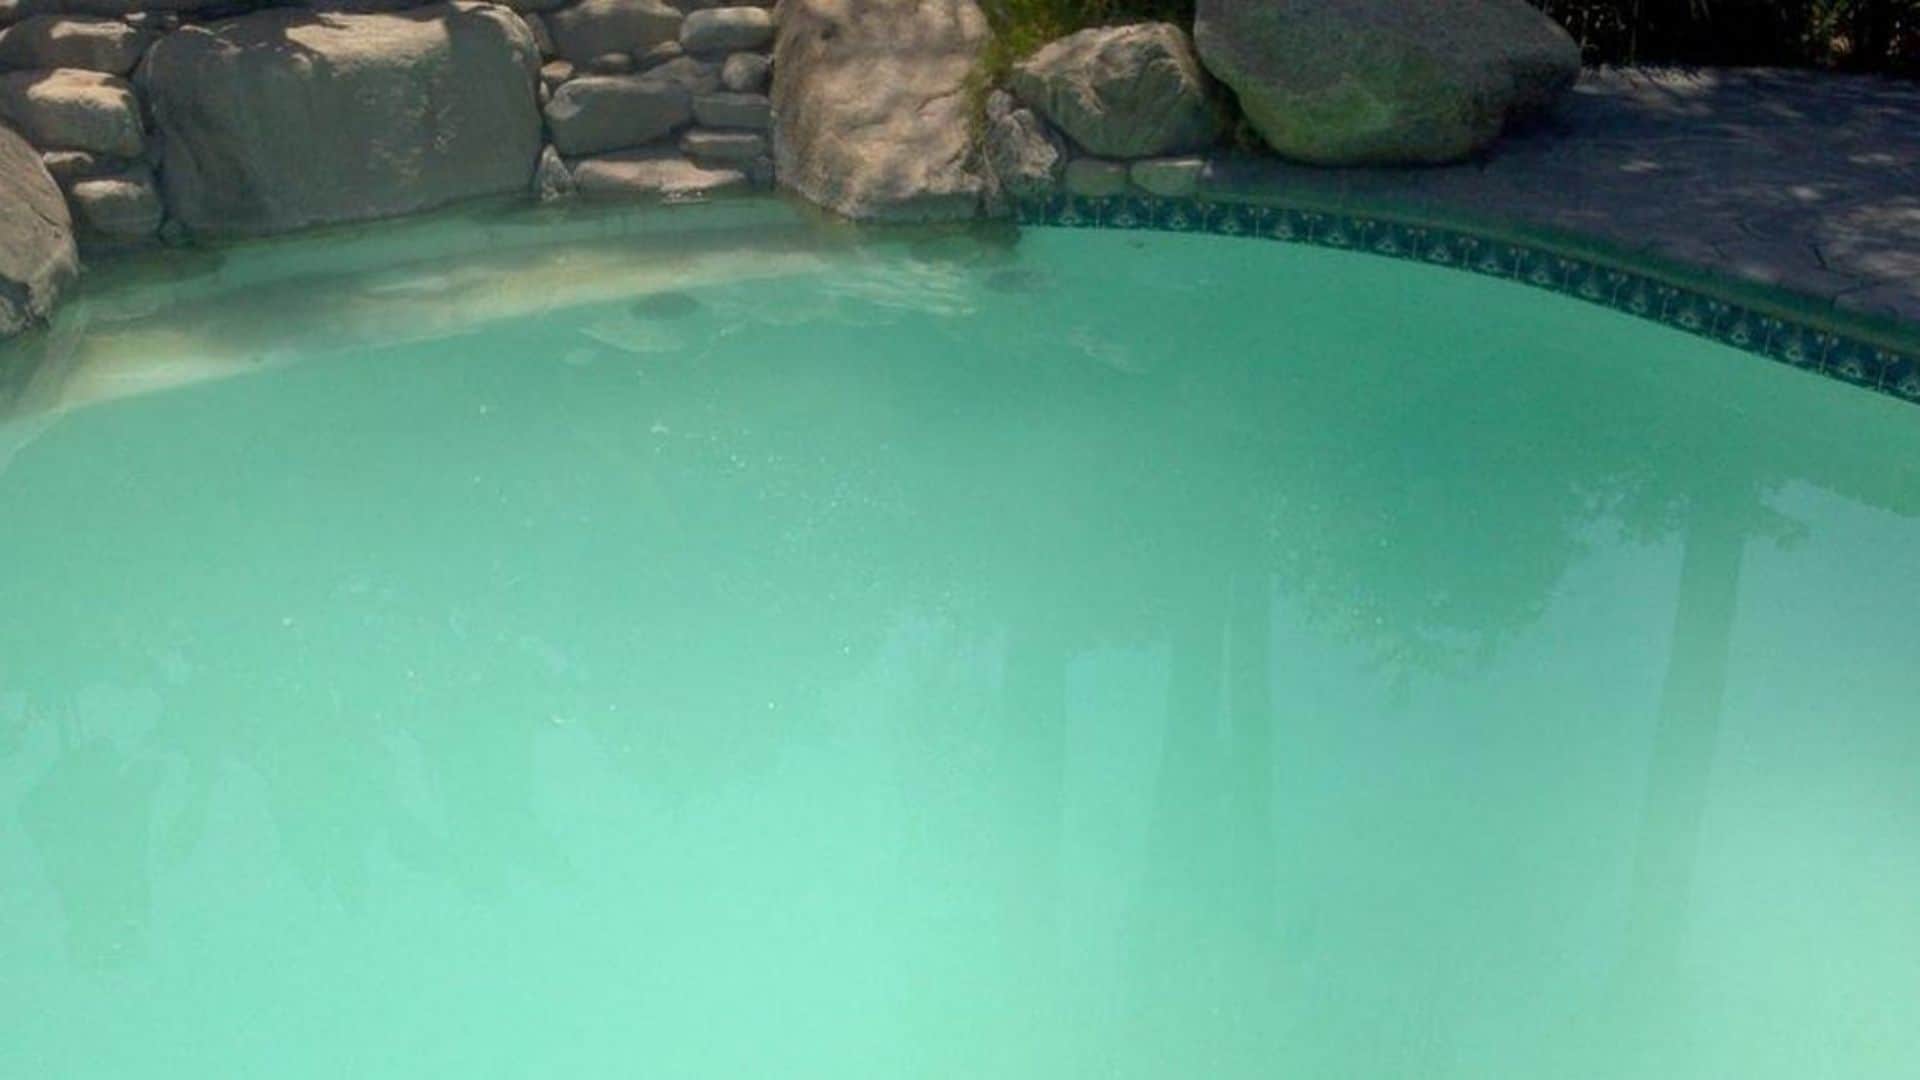 Why Is My Pool Cloudy? How to Fix a Cloudy Pool